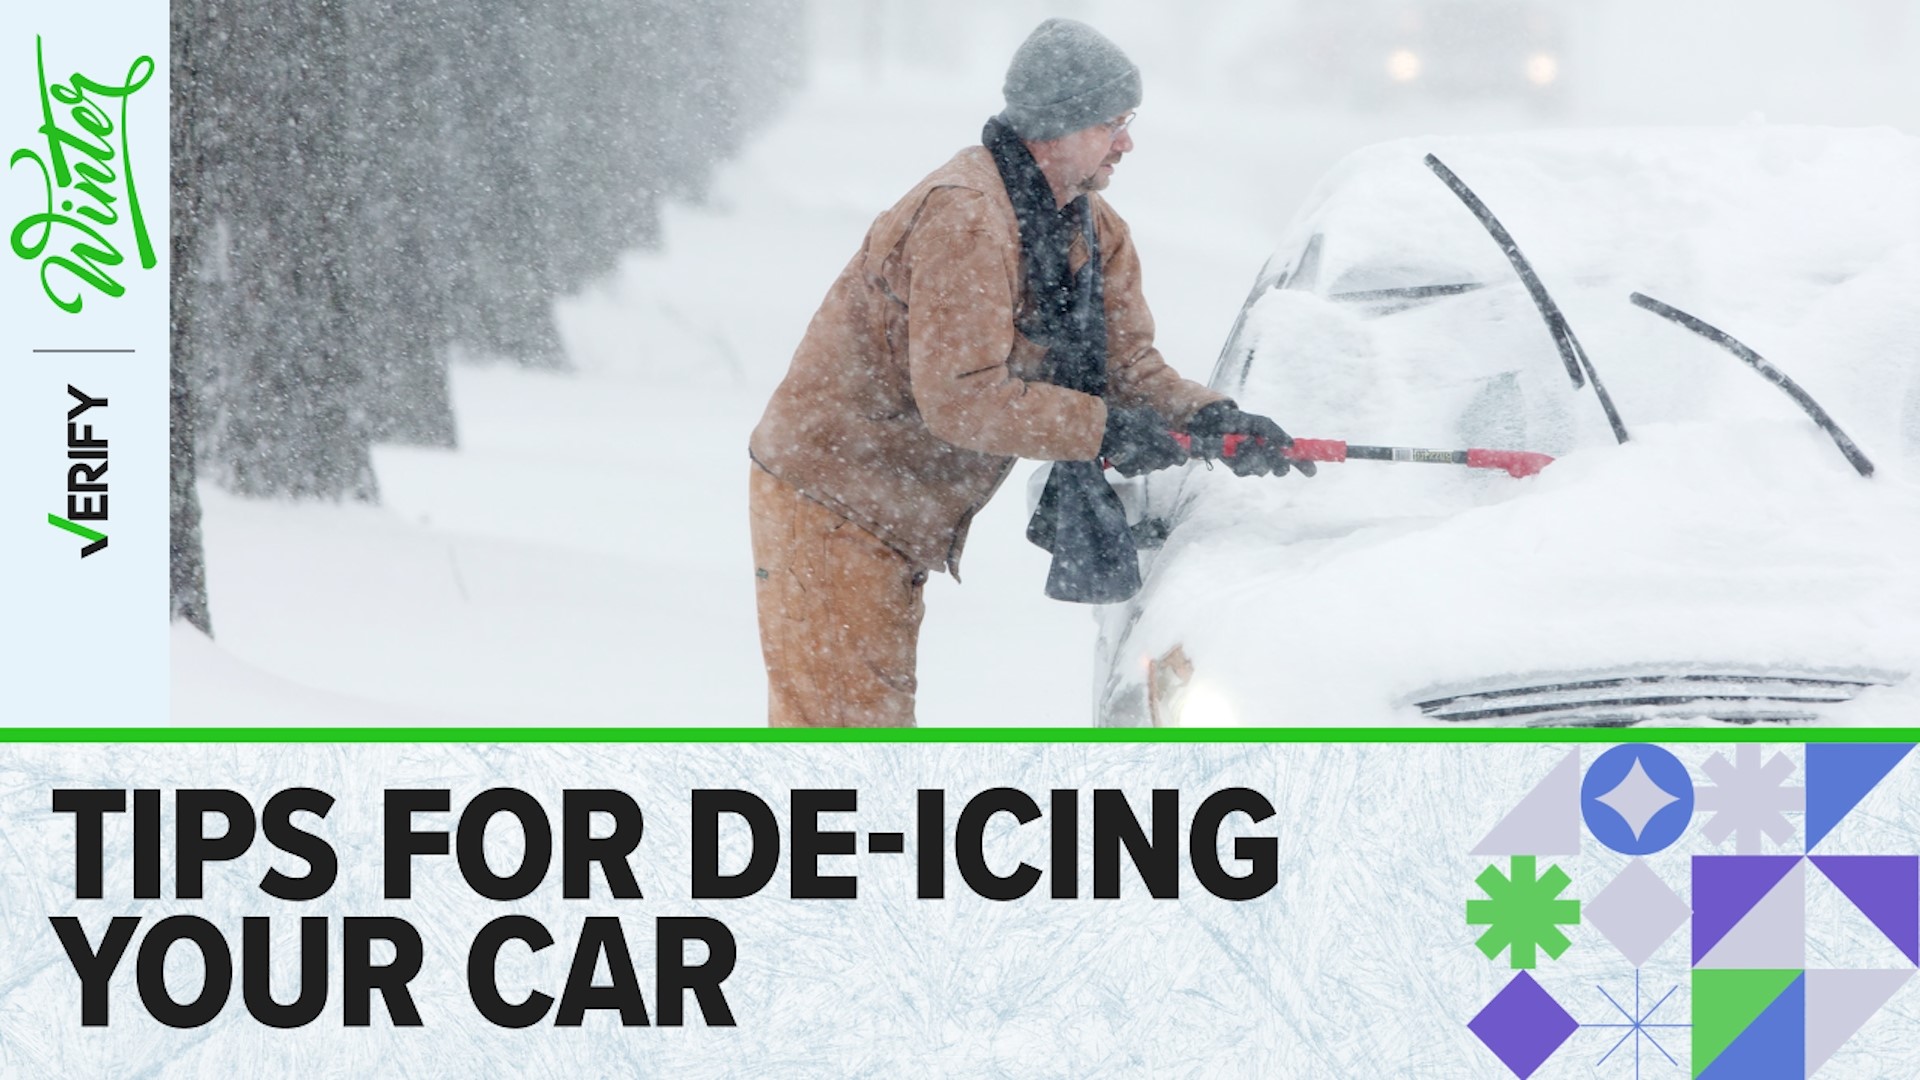 Do not use hot water, vinegar or ammonia on the windshield to remove snow. Don’t slap your windshield wipers to remove ice. Don’t use a snow shovel.